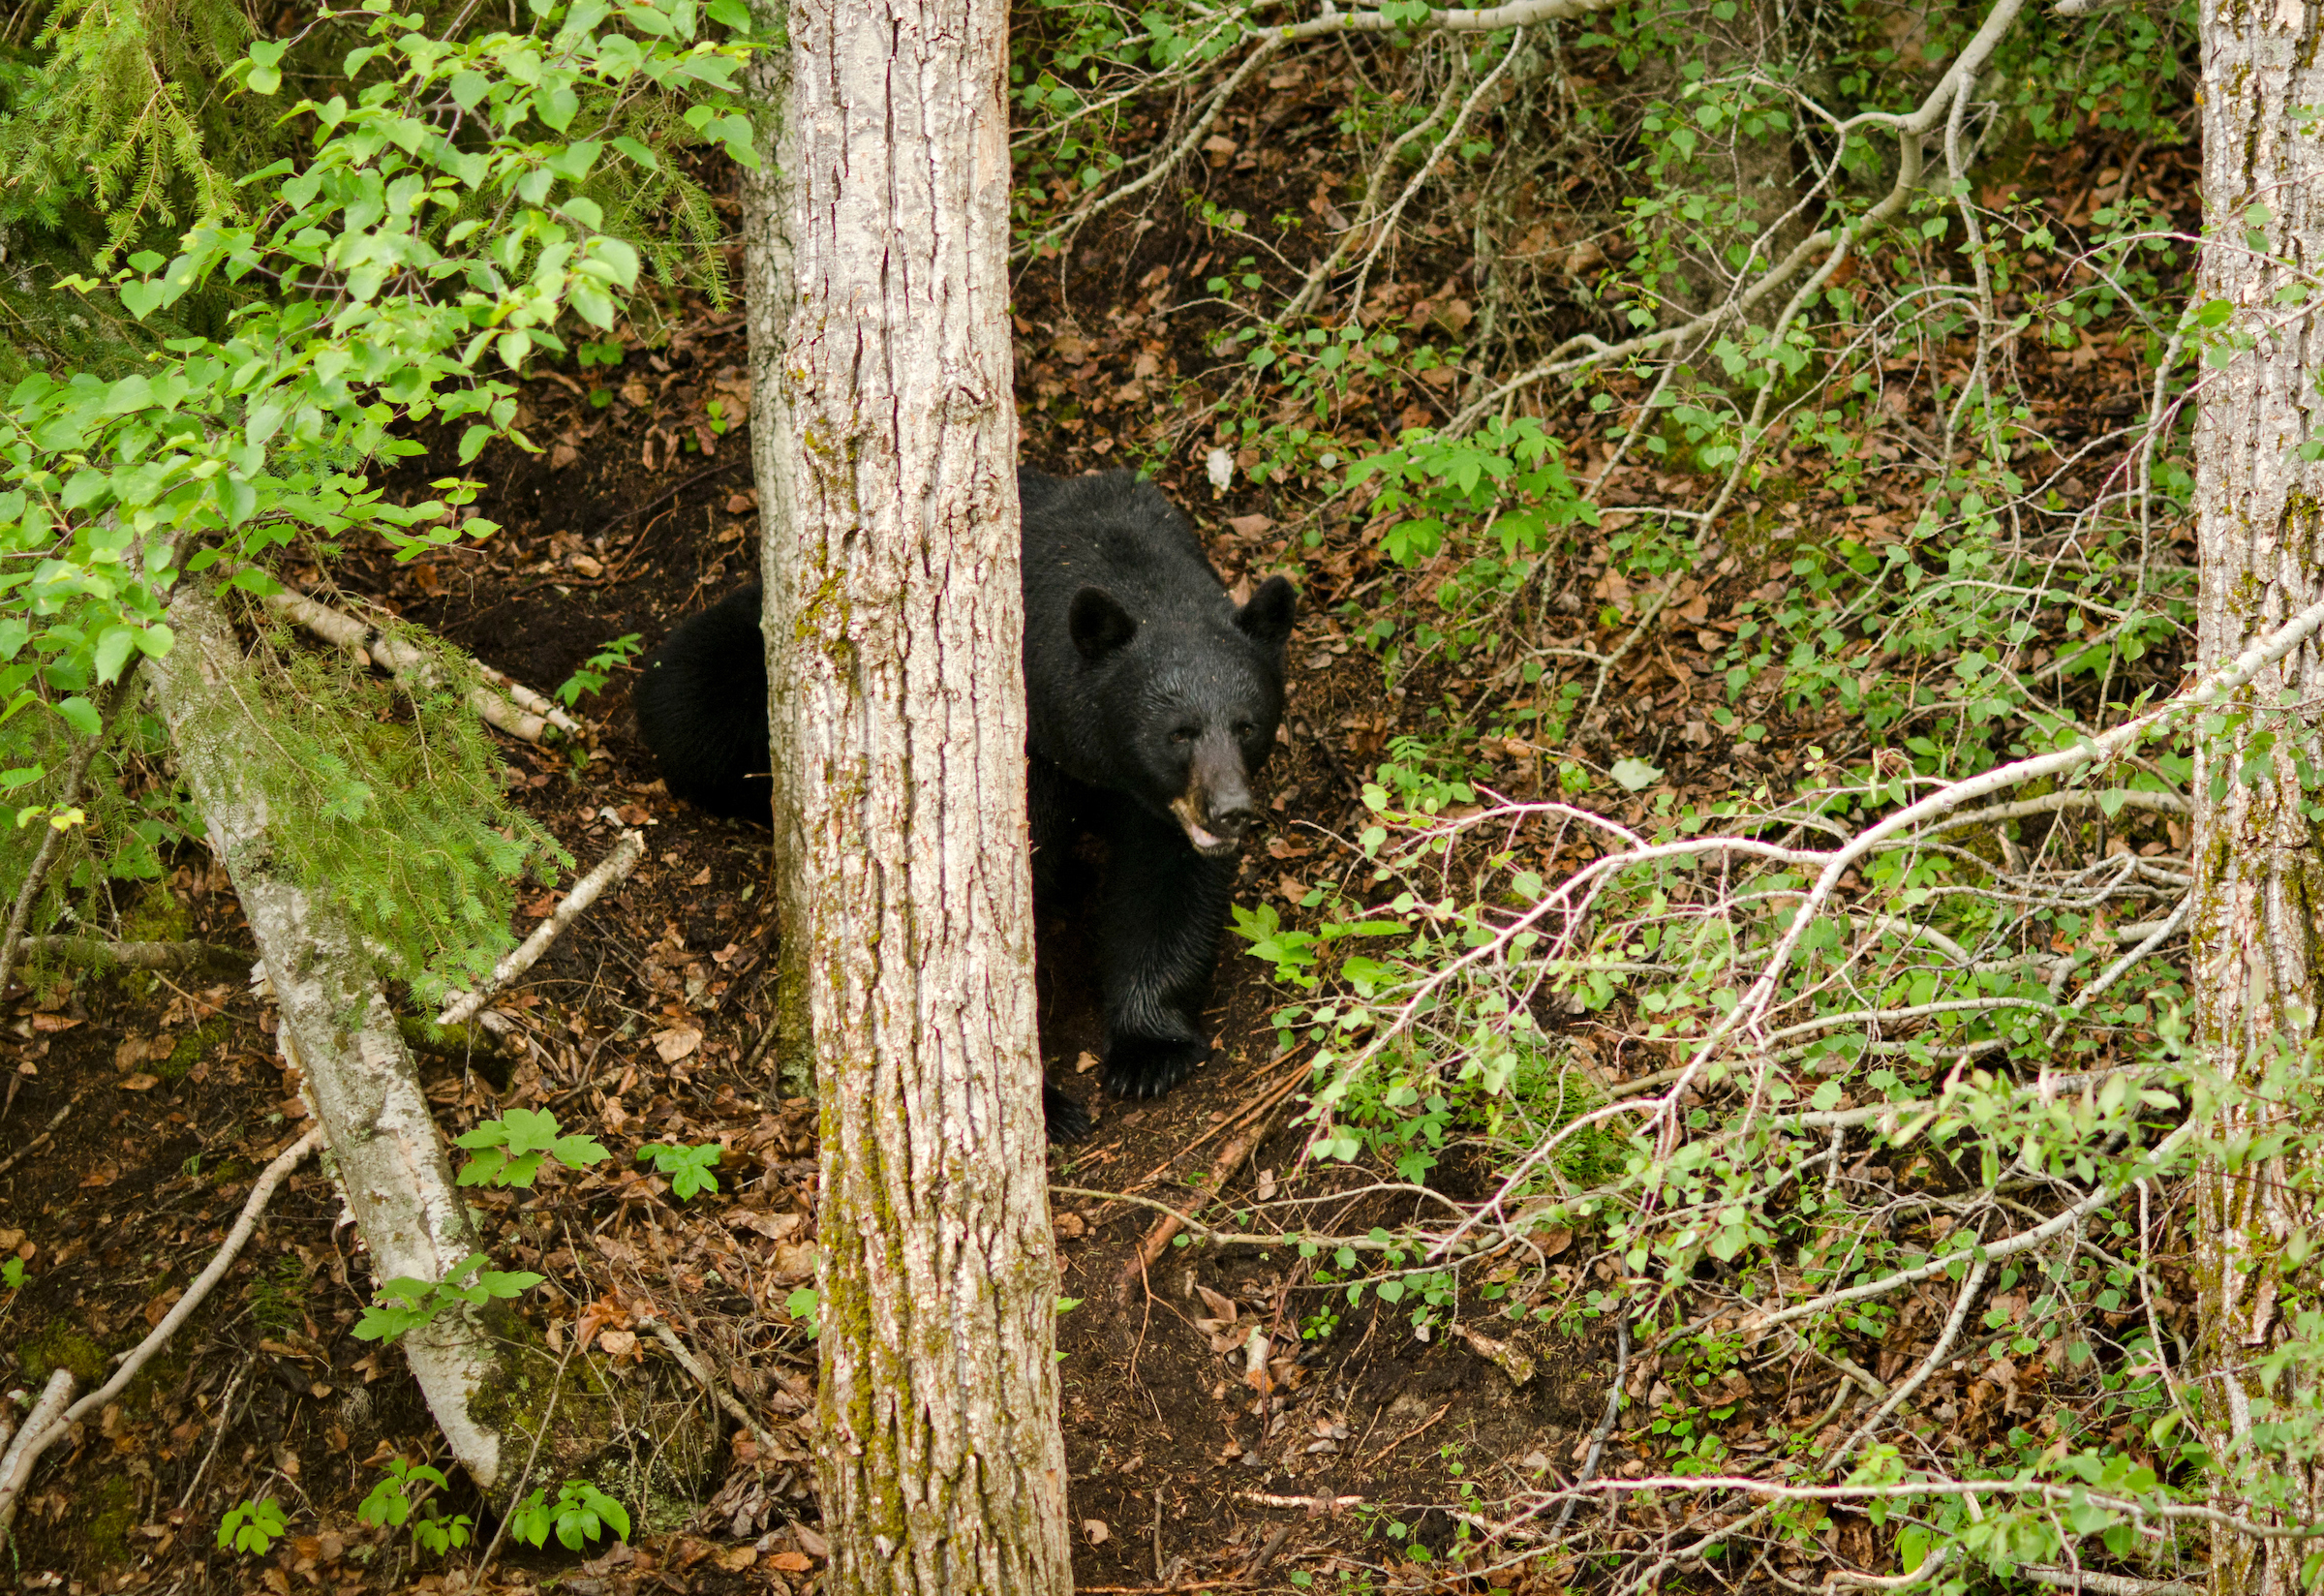 Washington State Lost Its Spring Bear Hunt to Political Overreach—And It’s Just the Beginning